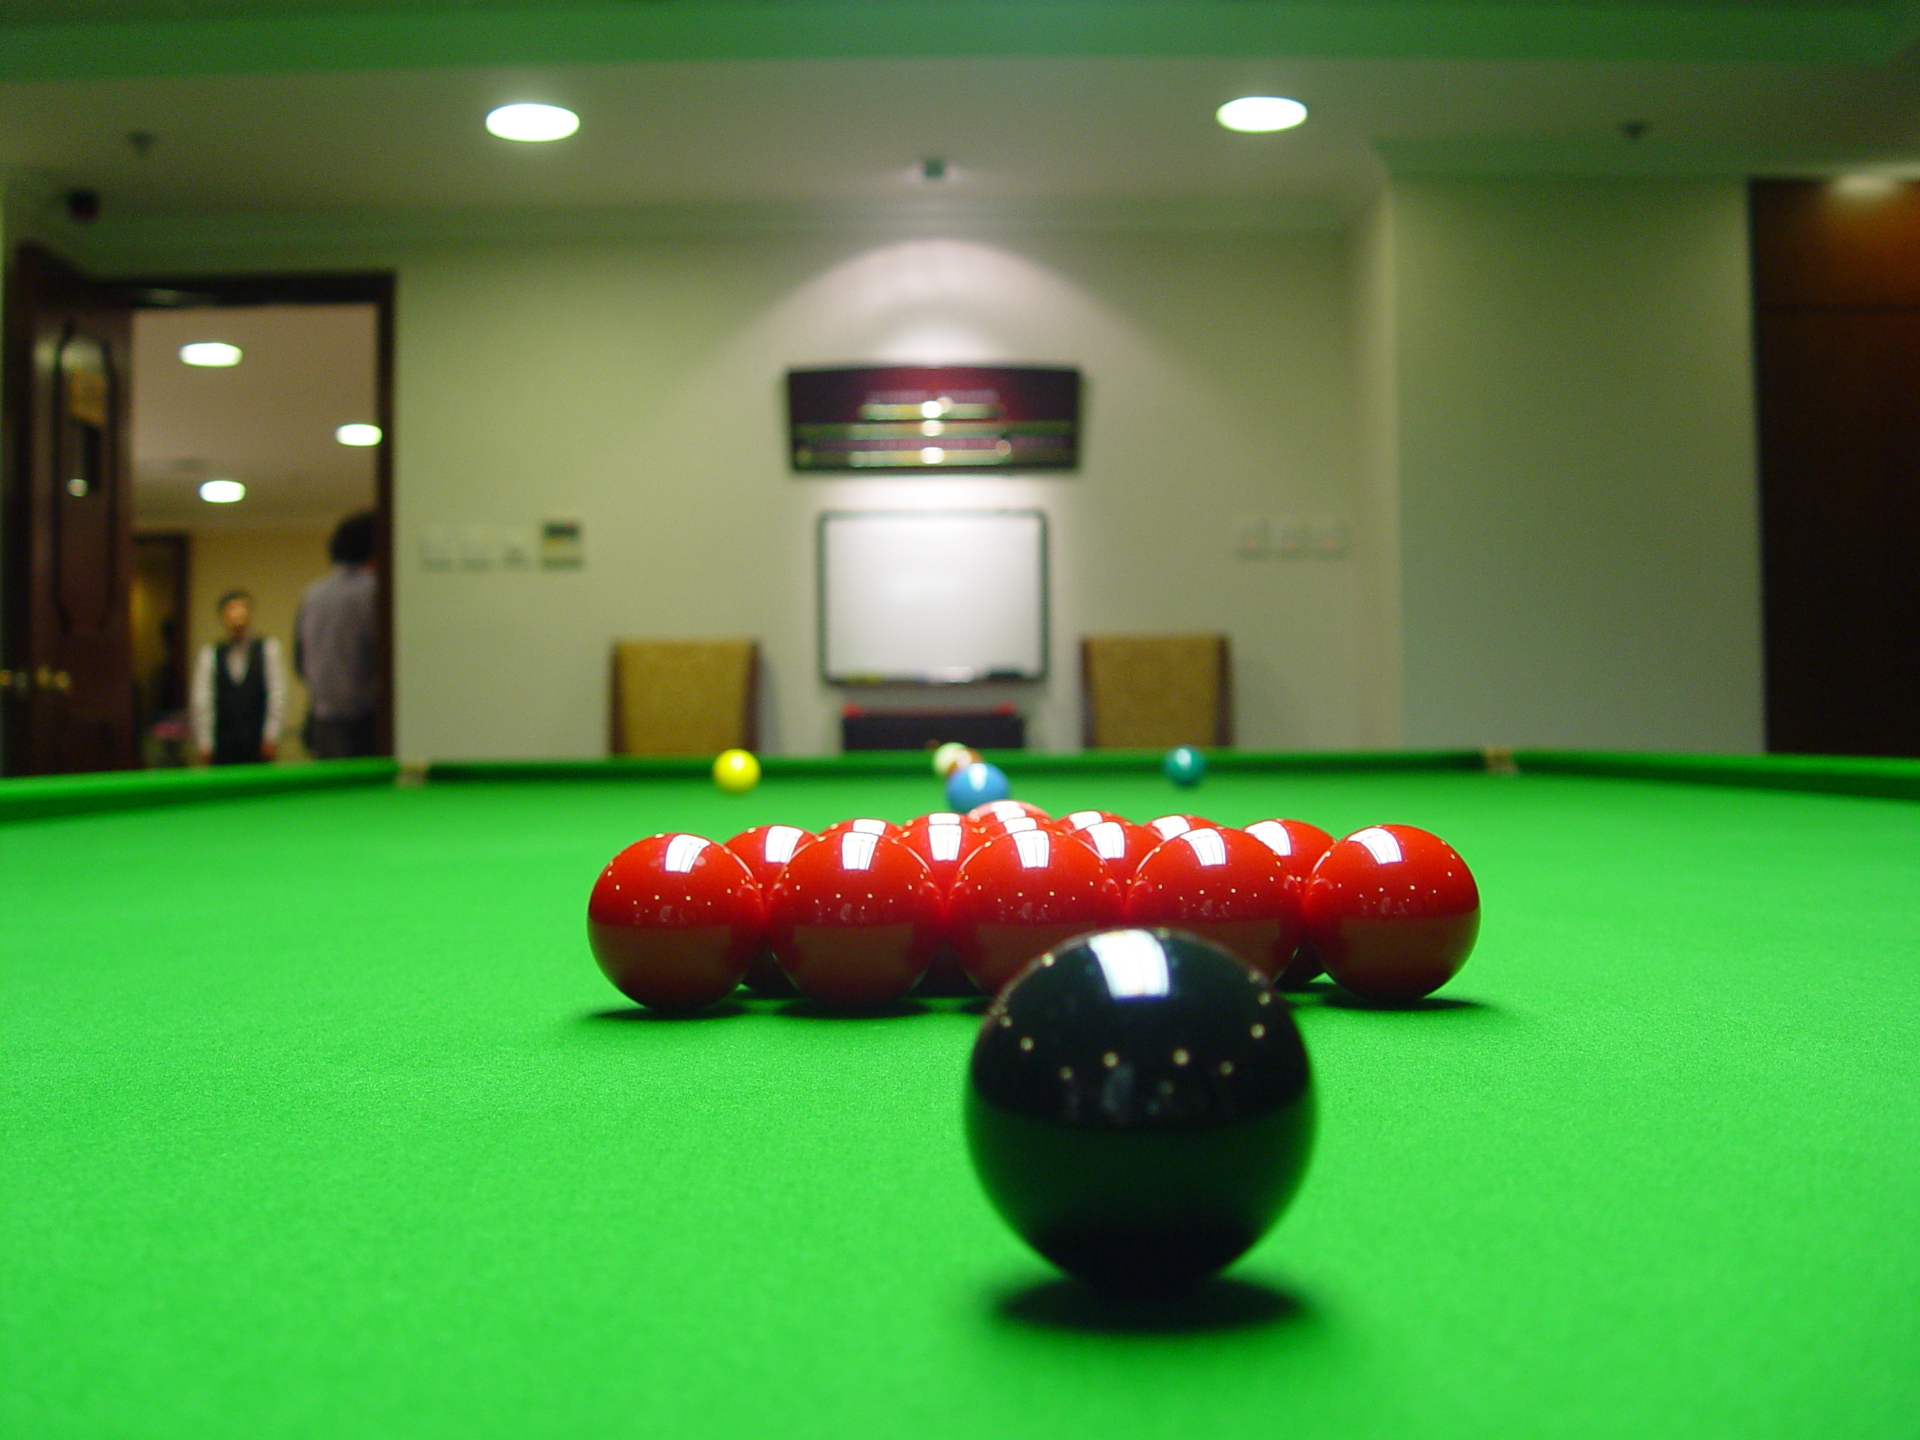 Snooker coaching: how to play screw shots